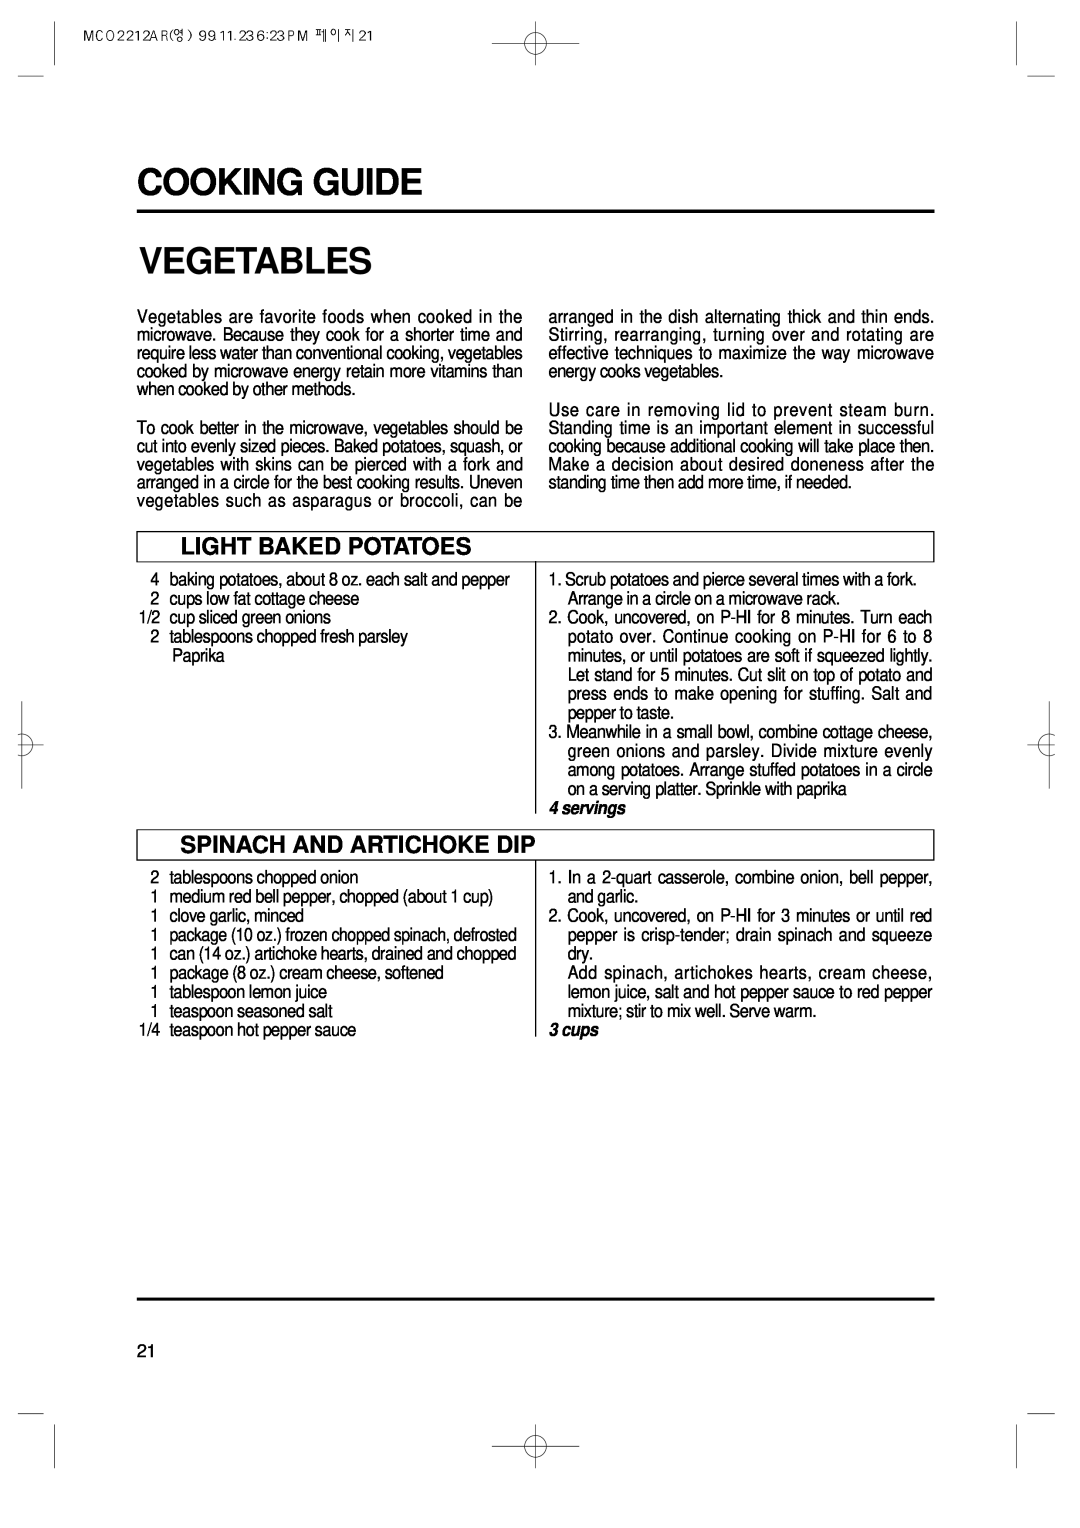 Magic Chef MCO2212AR manual Cooking Guide Vegetables, Light Baked Potatoes, Spinach And Artichoke Dip, servings, cups 